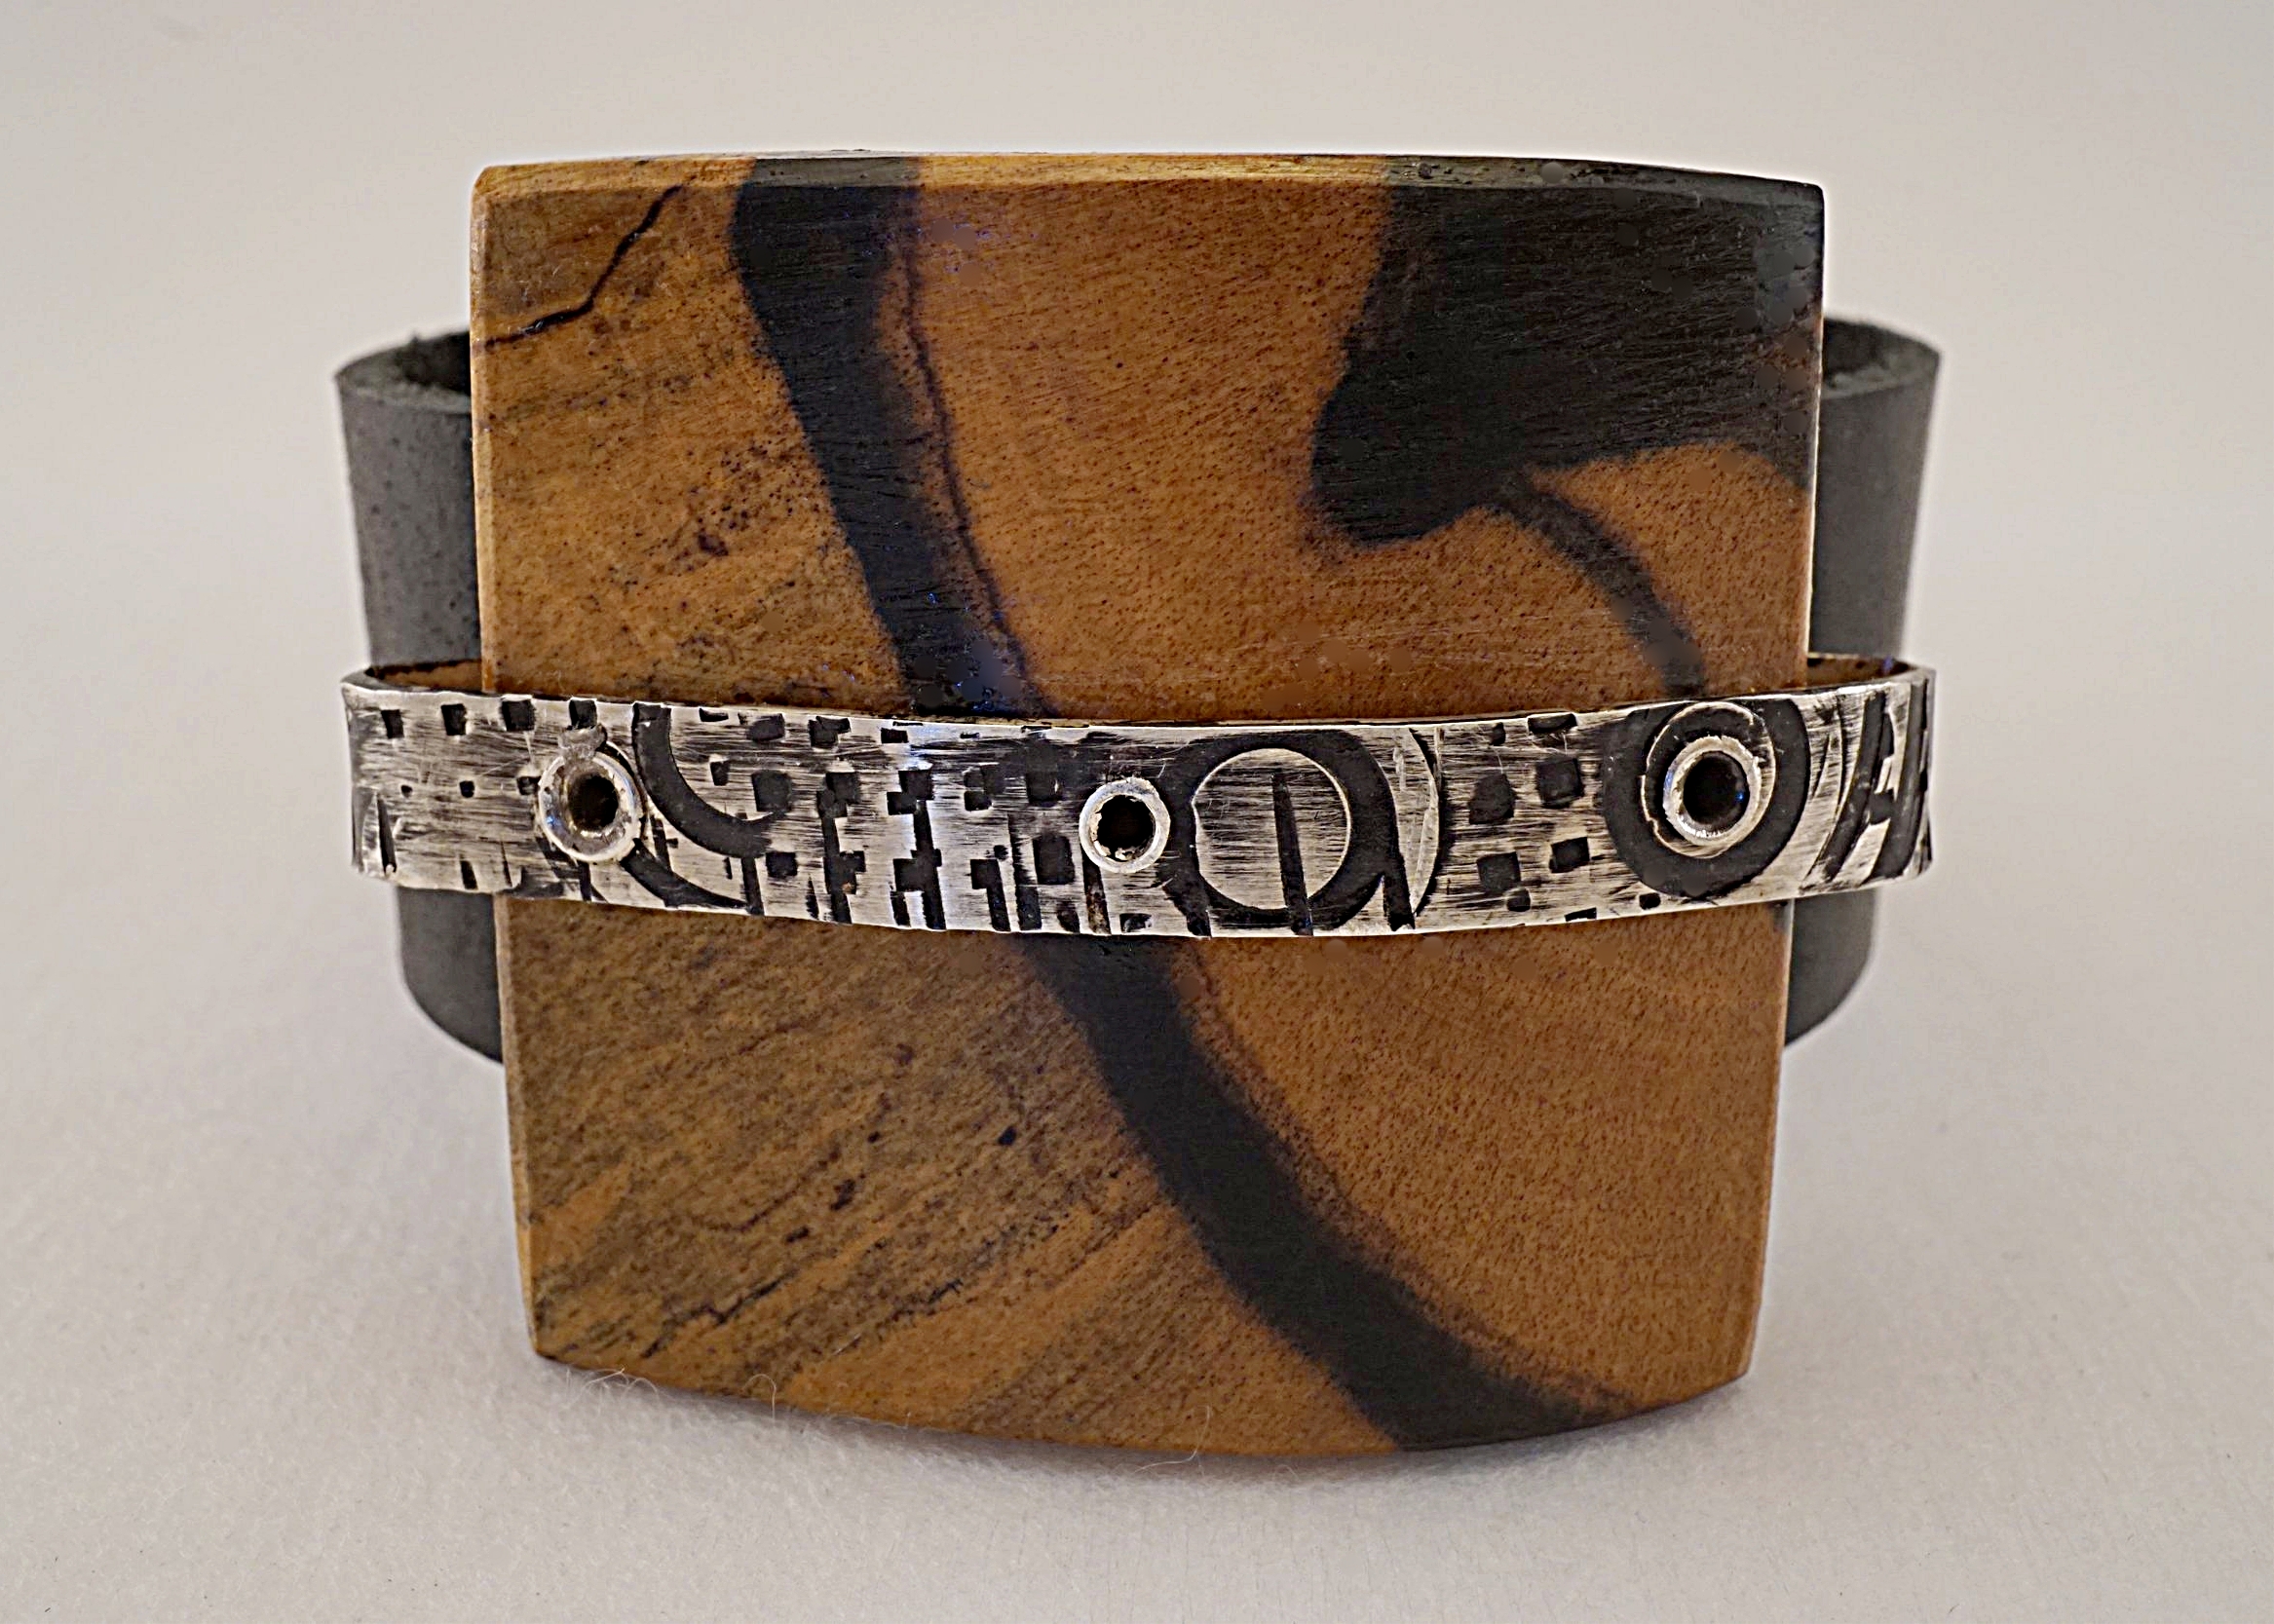 Hand carved black and white ebony wood with hand stamped sterling silver on black leather